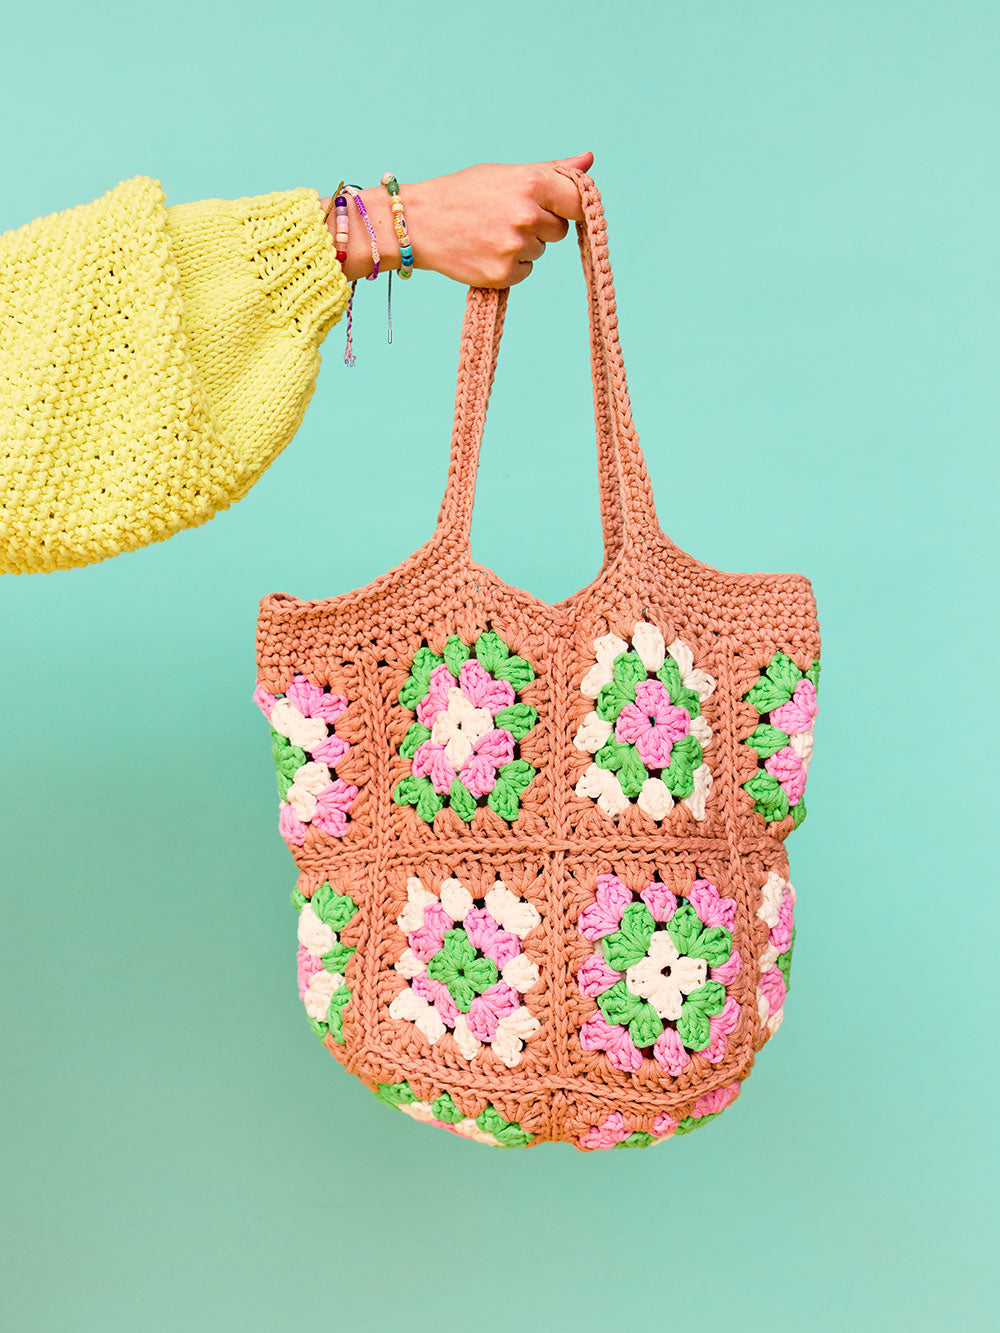 Learn to Crochet the Olive Knot Bag with Cardigang